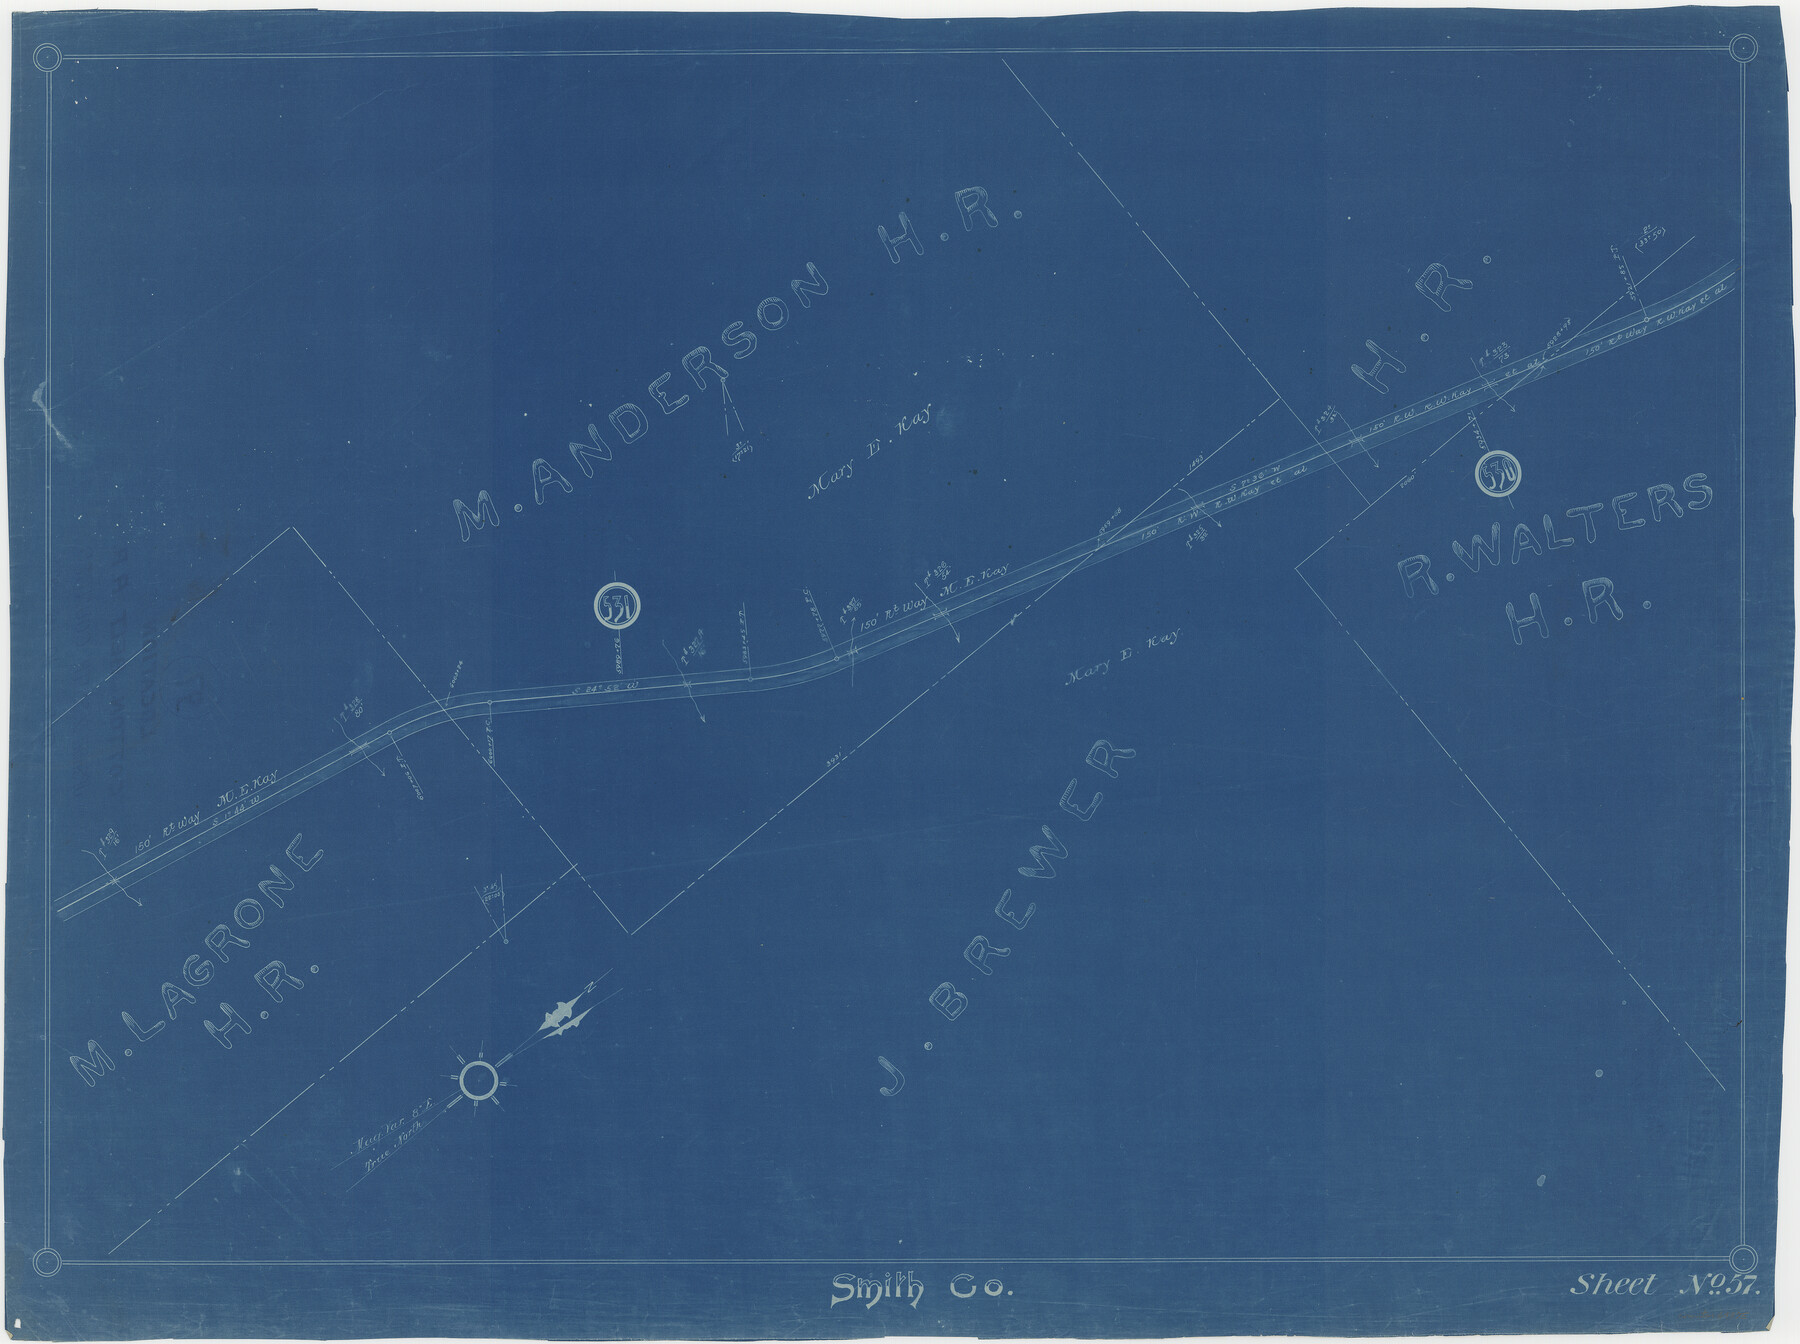 64375, [Cotton Belt, St. Louis Southwestern Railway of Texas, Alignment through Smith County], General Map Collection